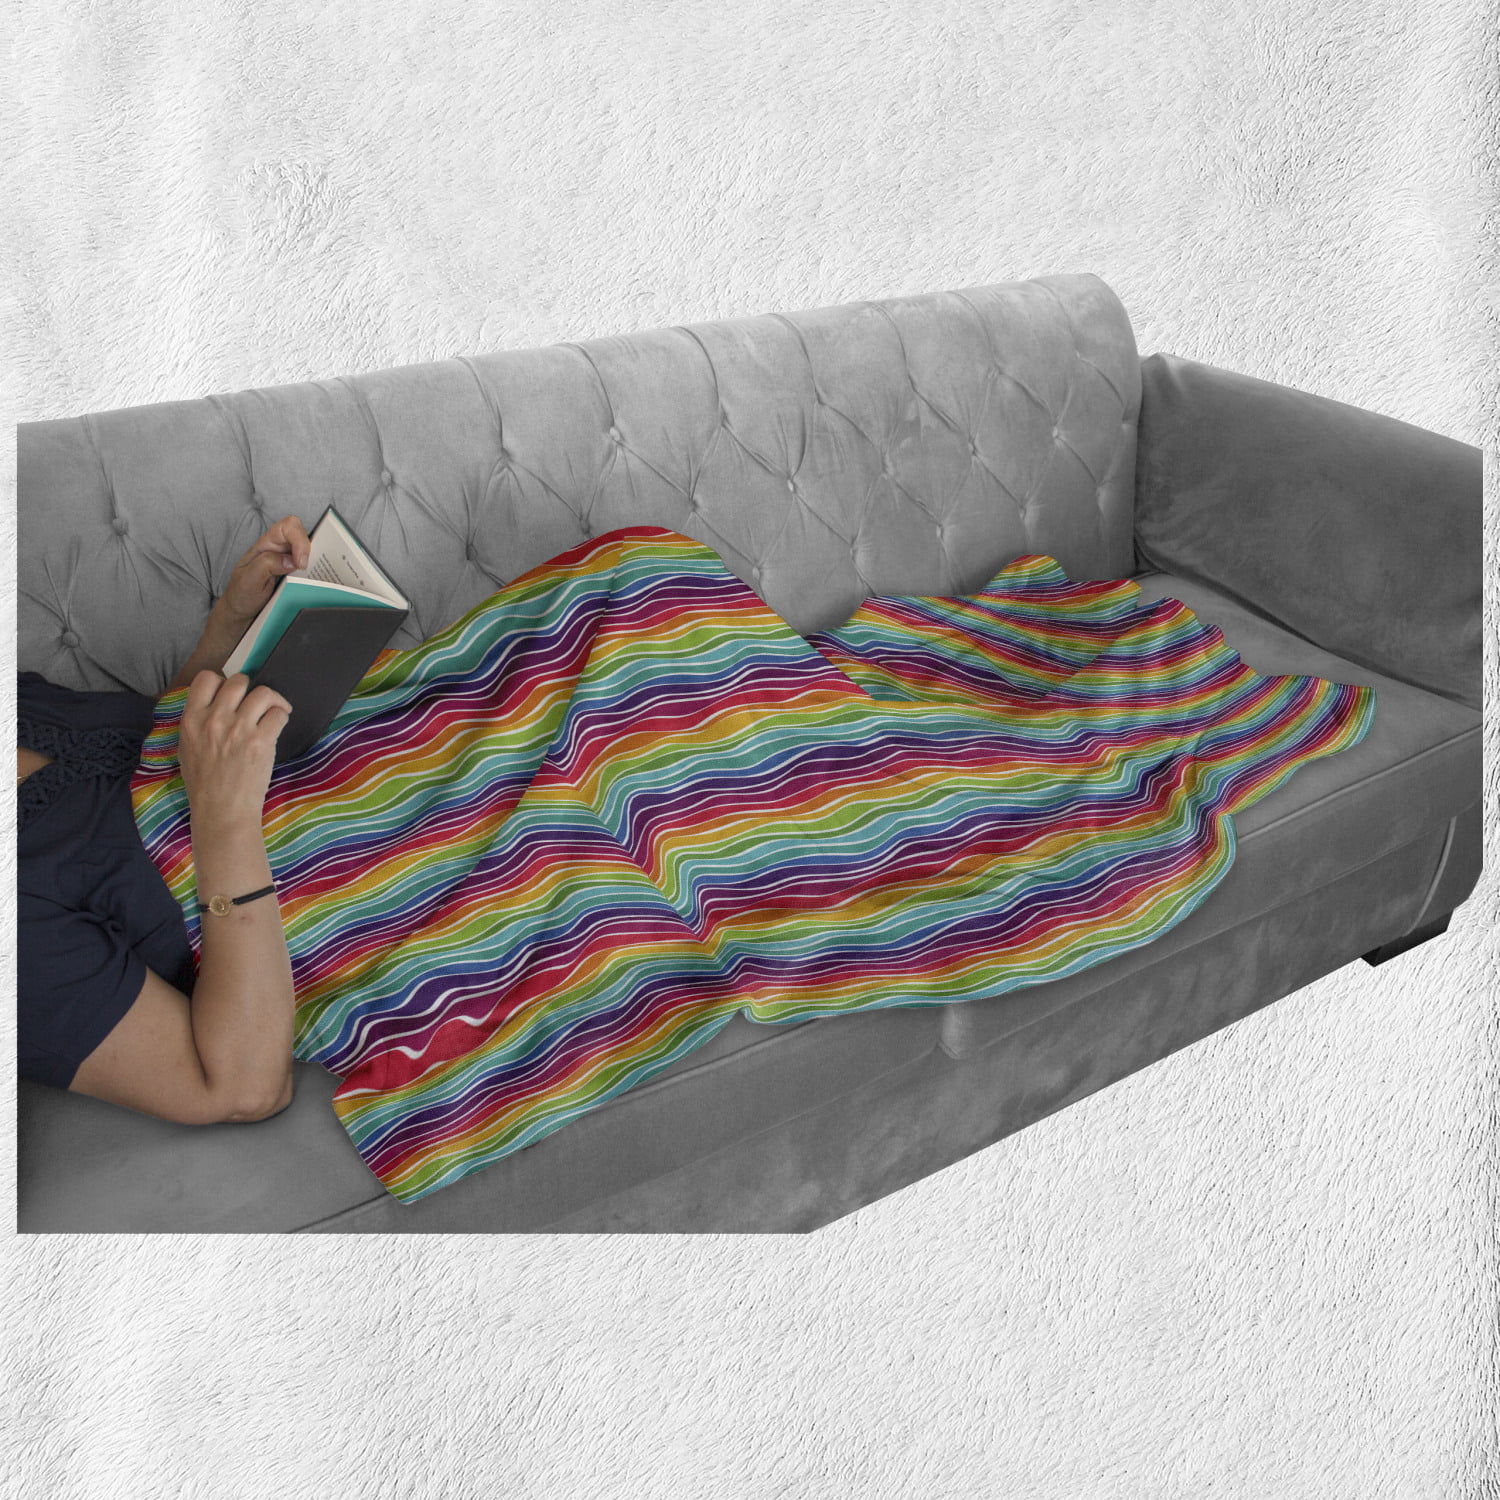 Colorful Swirls Vertical Waves Rhythmic Design Cheerful Funky Retro Graphic Ambesonne Rainbow Soft Flannel Fleece Throw Blanket 70 x 90 Multicolor Cozy Plush for Indoor and Outdoor Use